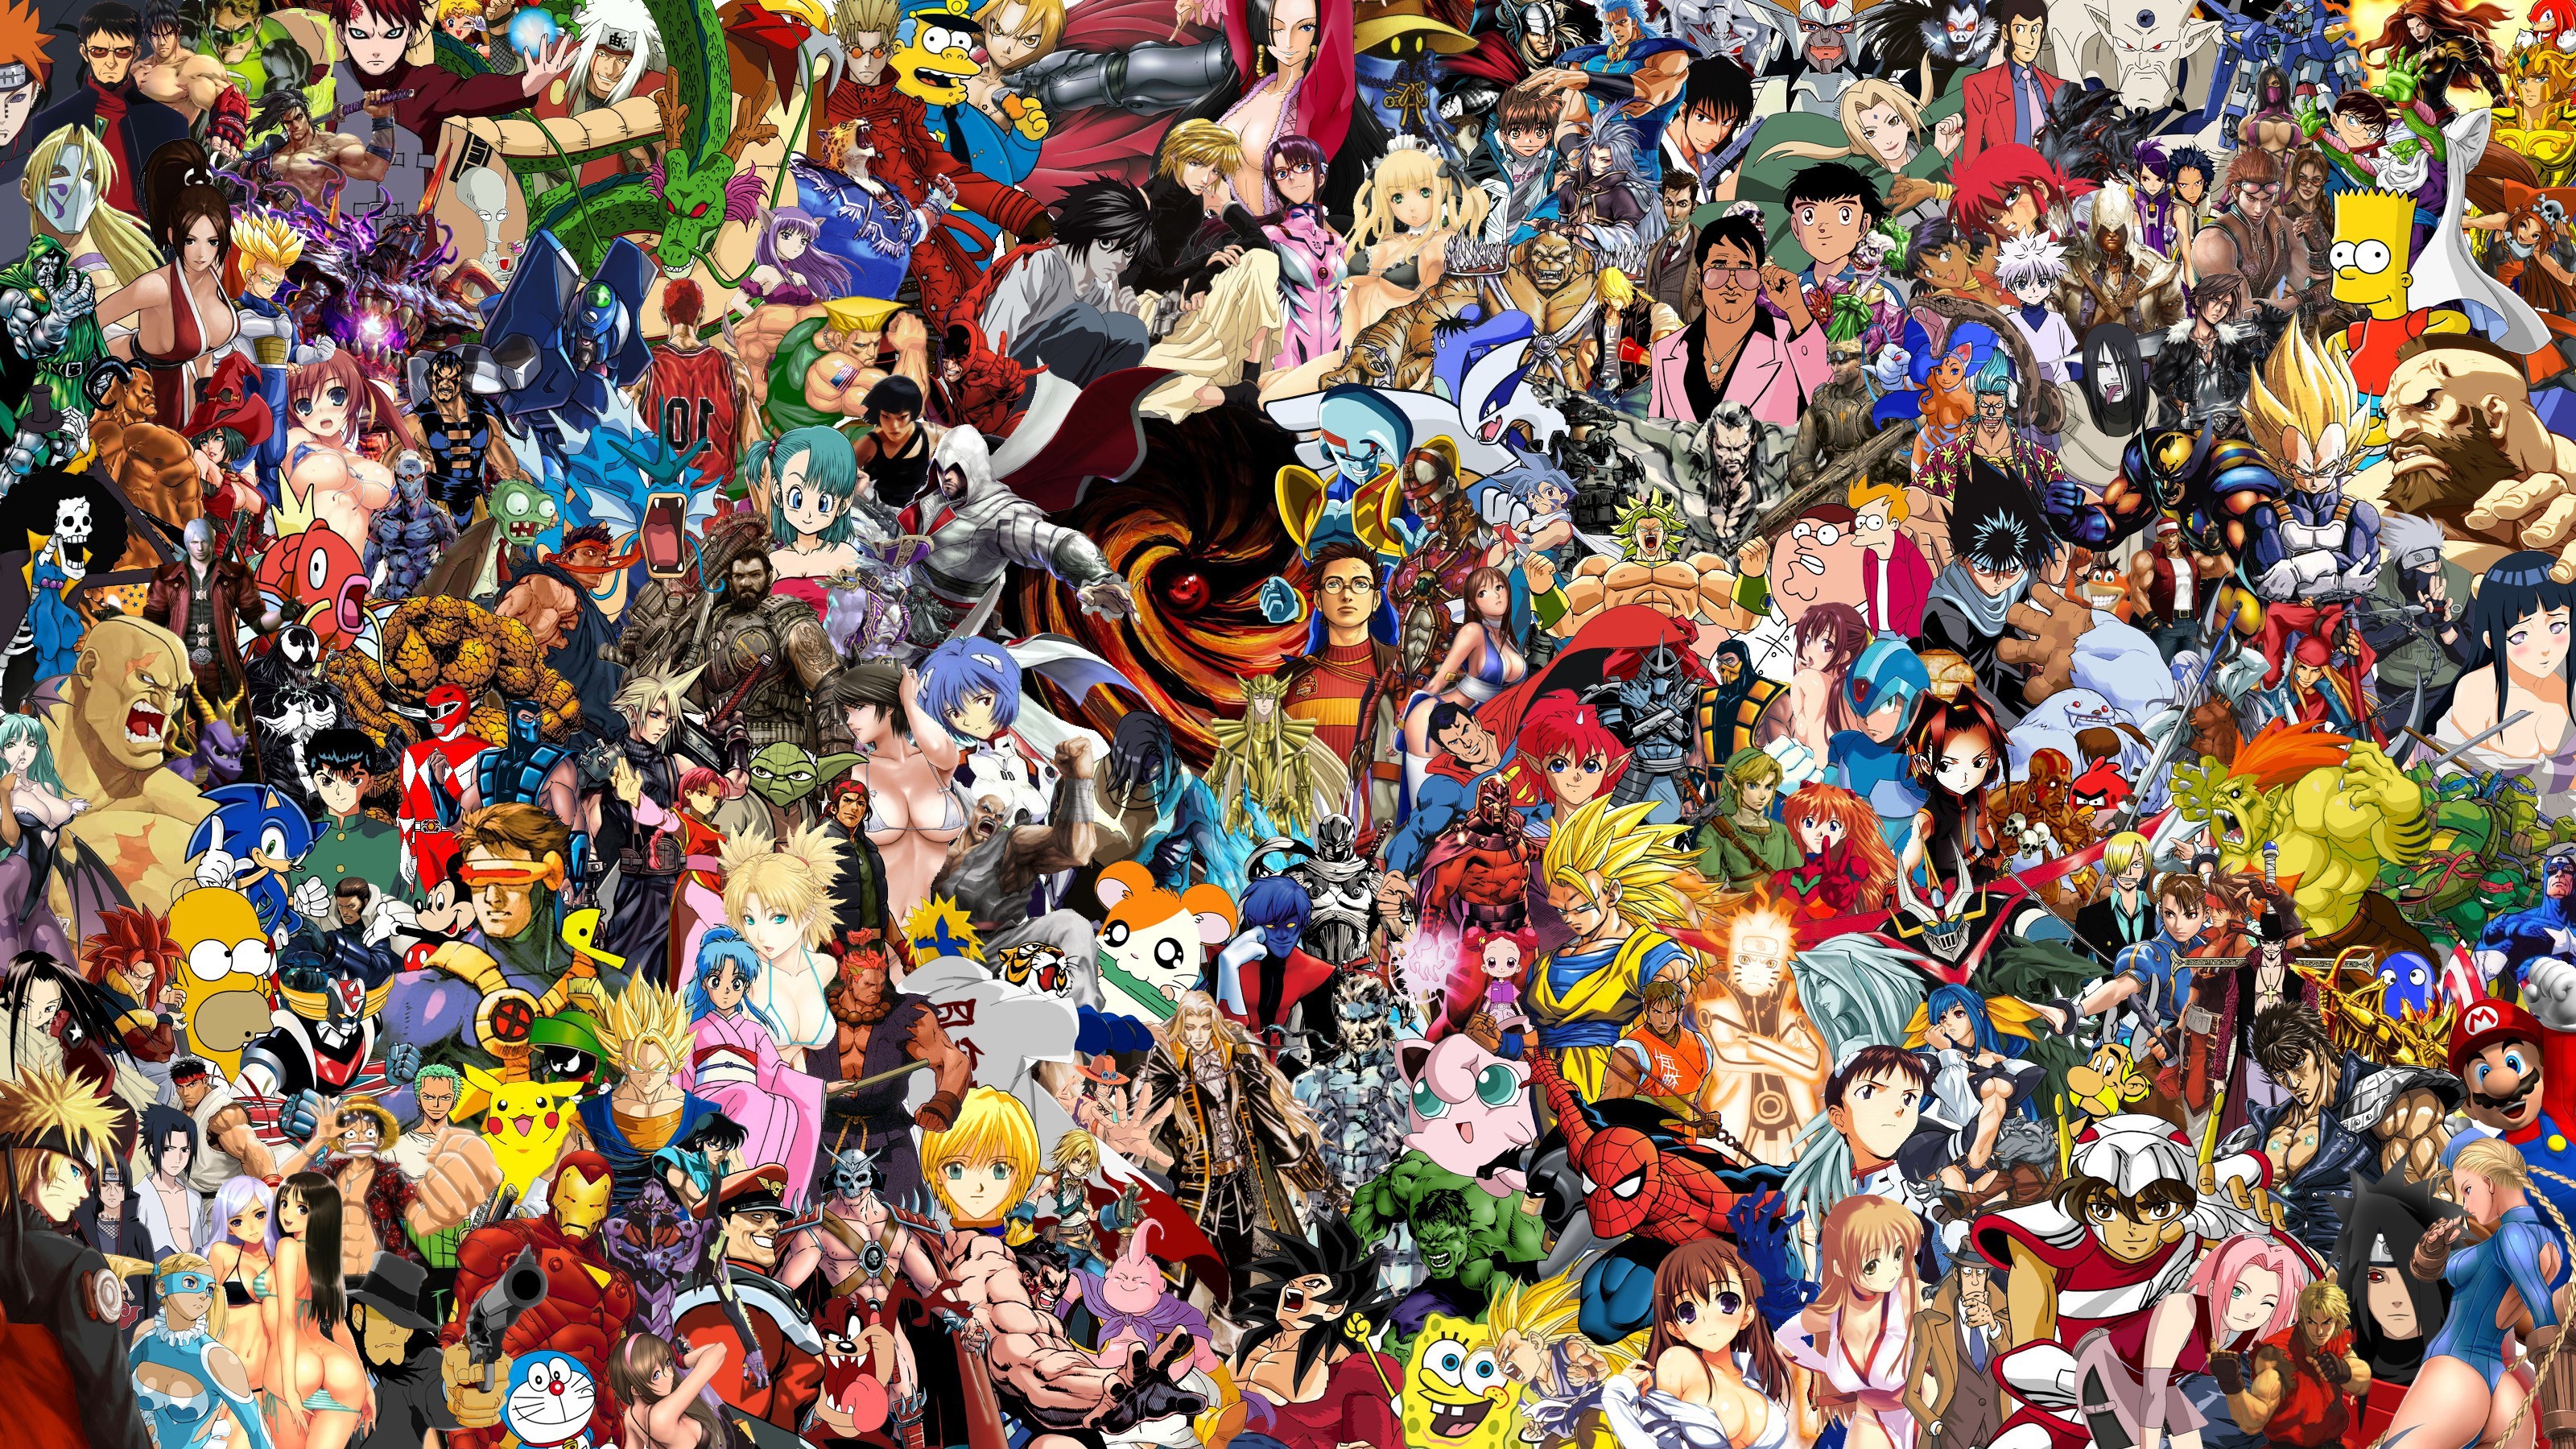 BigPuzzle.net - play free daily online jigsaw puzzles full screen games  with rotation option! anime jigsaw puzzles